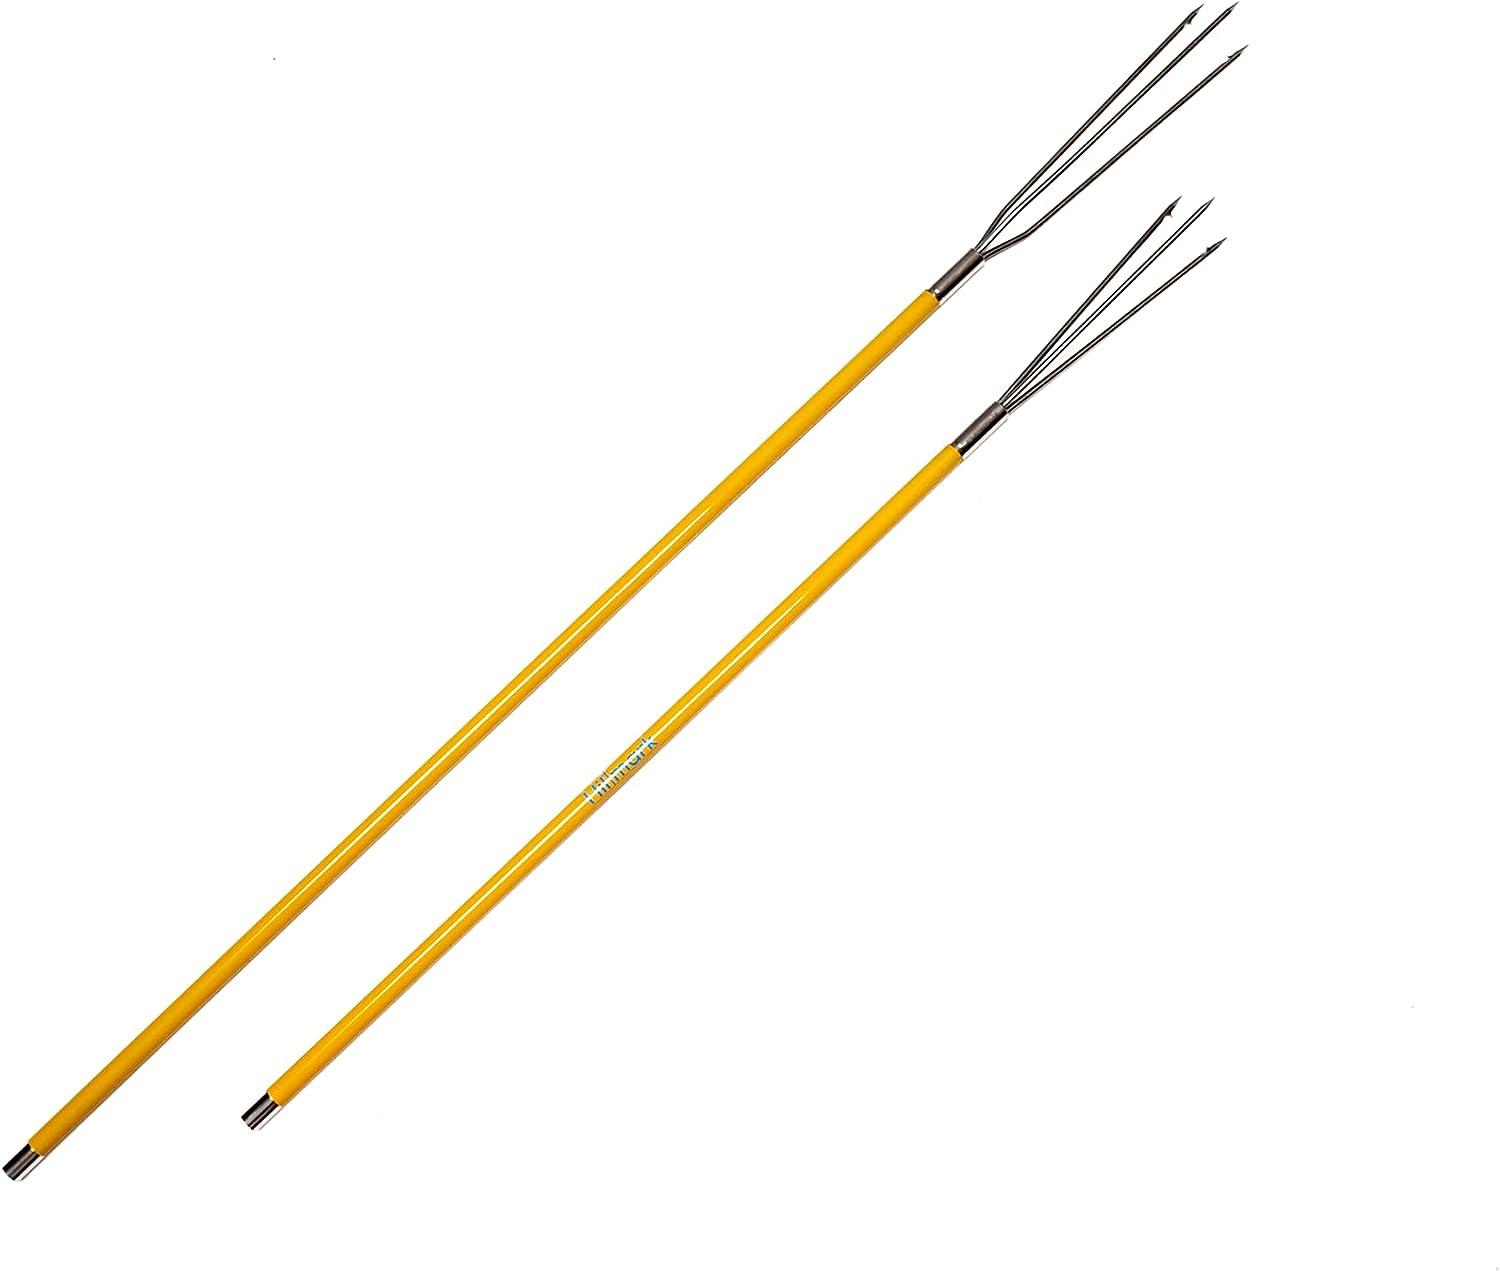 Hawaiian Sling Fishing Spear Set - 3 Piece Travel Fiberglass Pole Spear  Harpoon for Fishing with Stainless Steel Single Barb, Lionfish & Paralyzer  Tips - Also Includes Fishing Stringer & Travel Bag